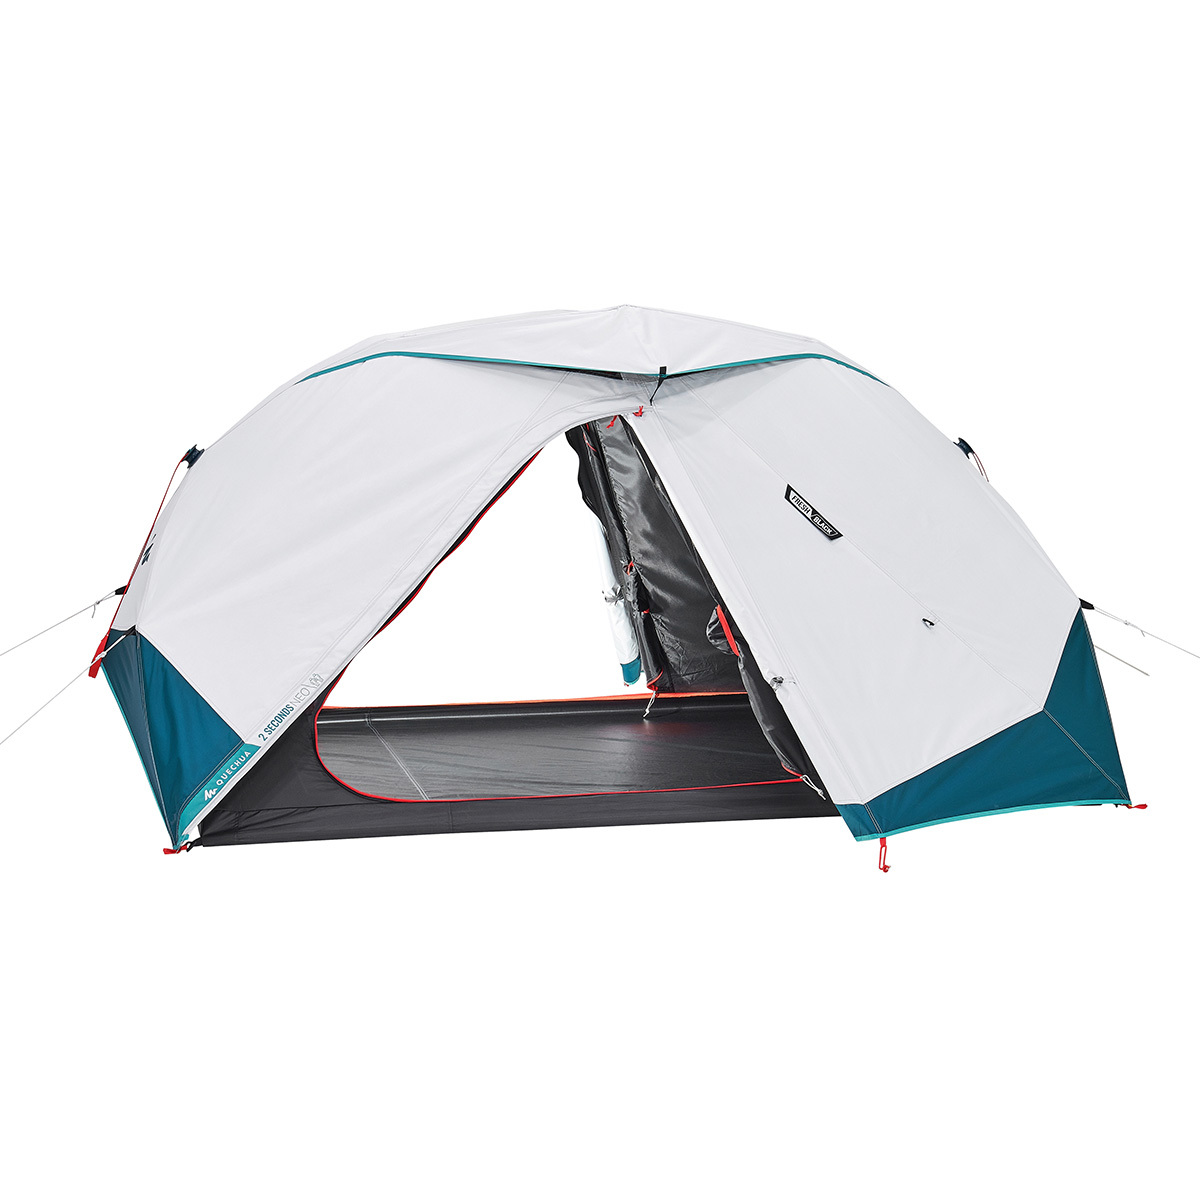 Siesta anything in the middle of nowhere QUECHUA - Cort camping 2 Seconds Easy Fresh&Black 2 Persoane | Decathlon